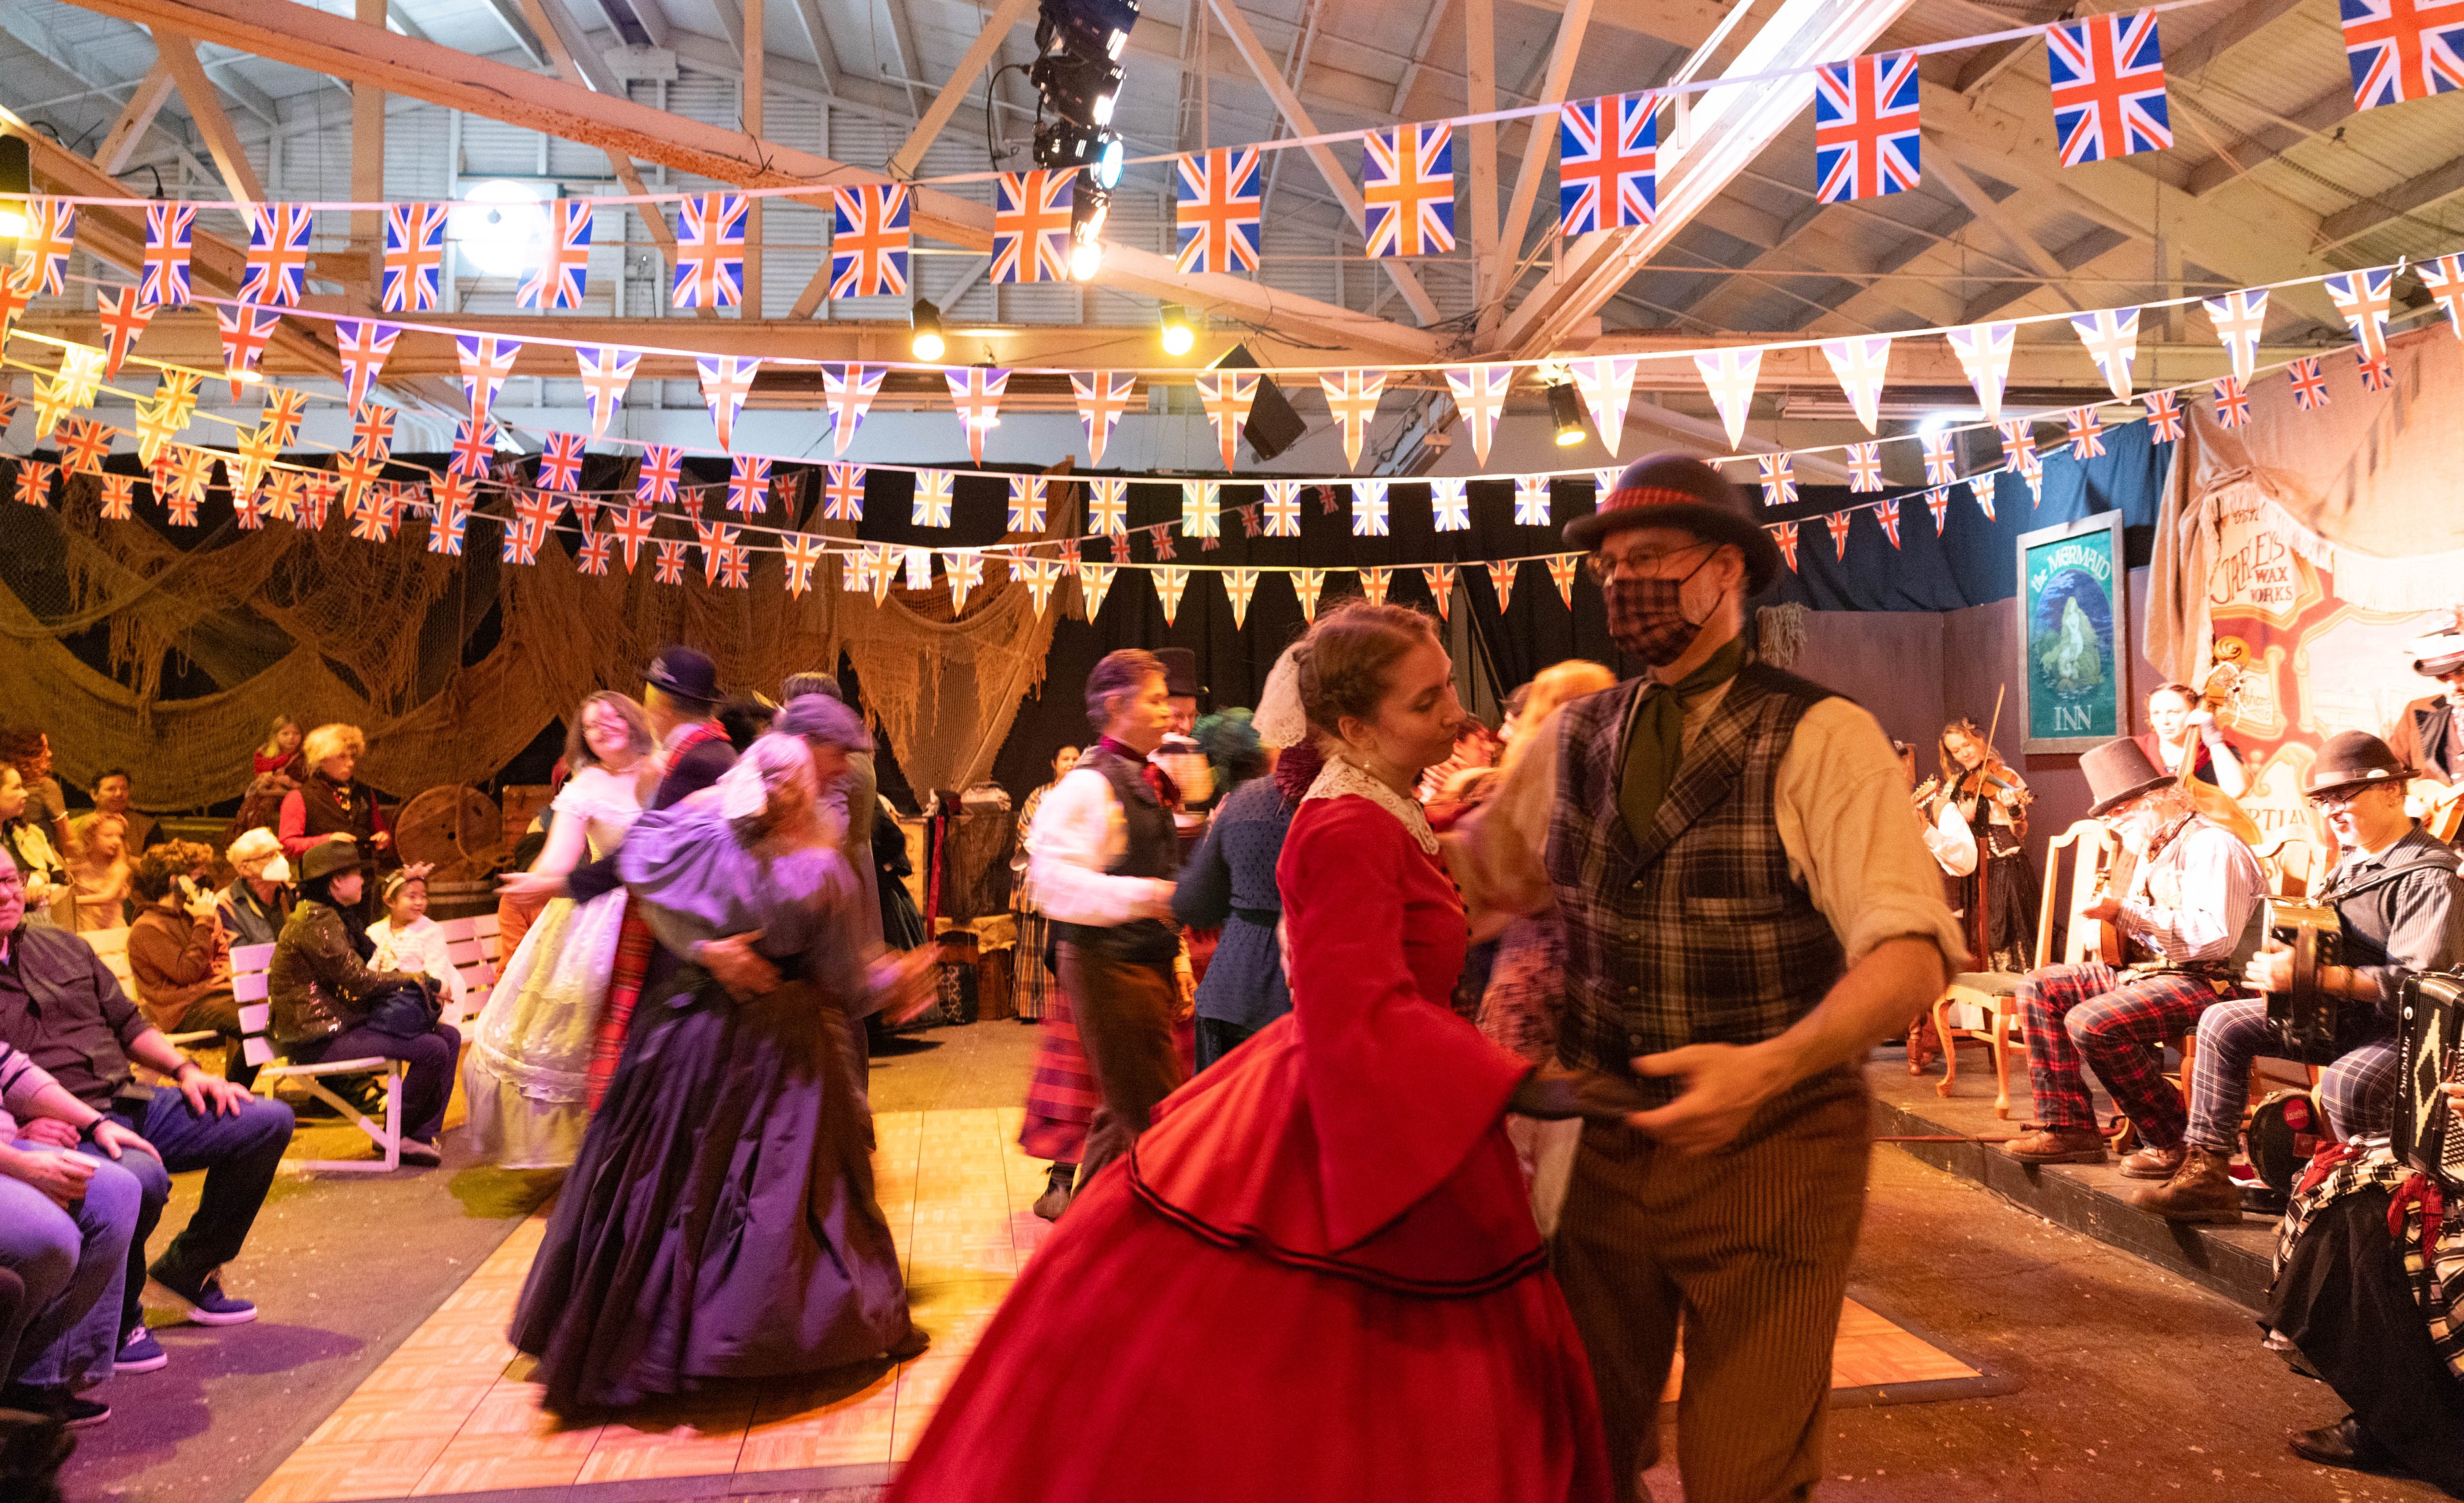 Couples dance while clad in Victorian era clothing at the Great Dickens Christmas Fair.